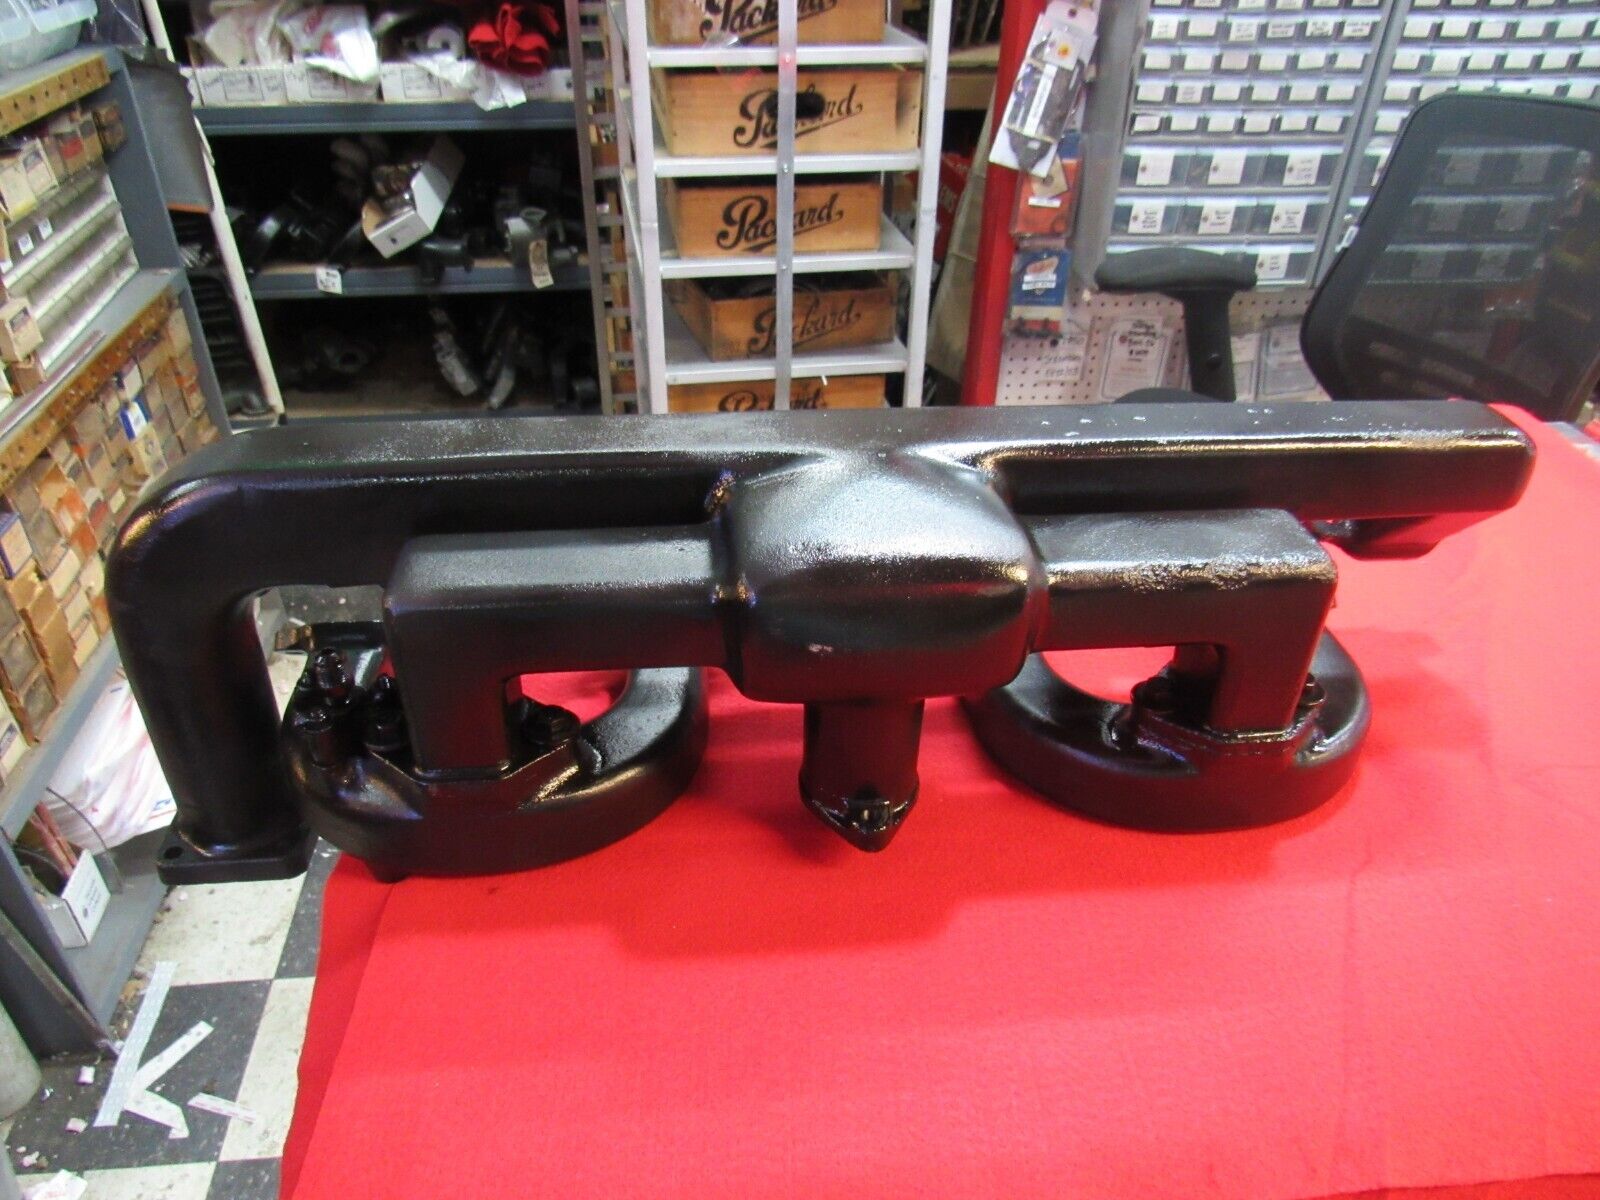 1932 Packard Standard Eight intake and exhaust manifold